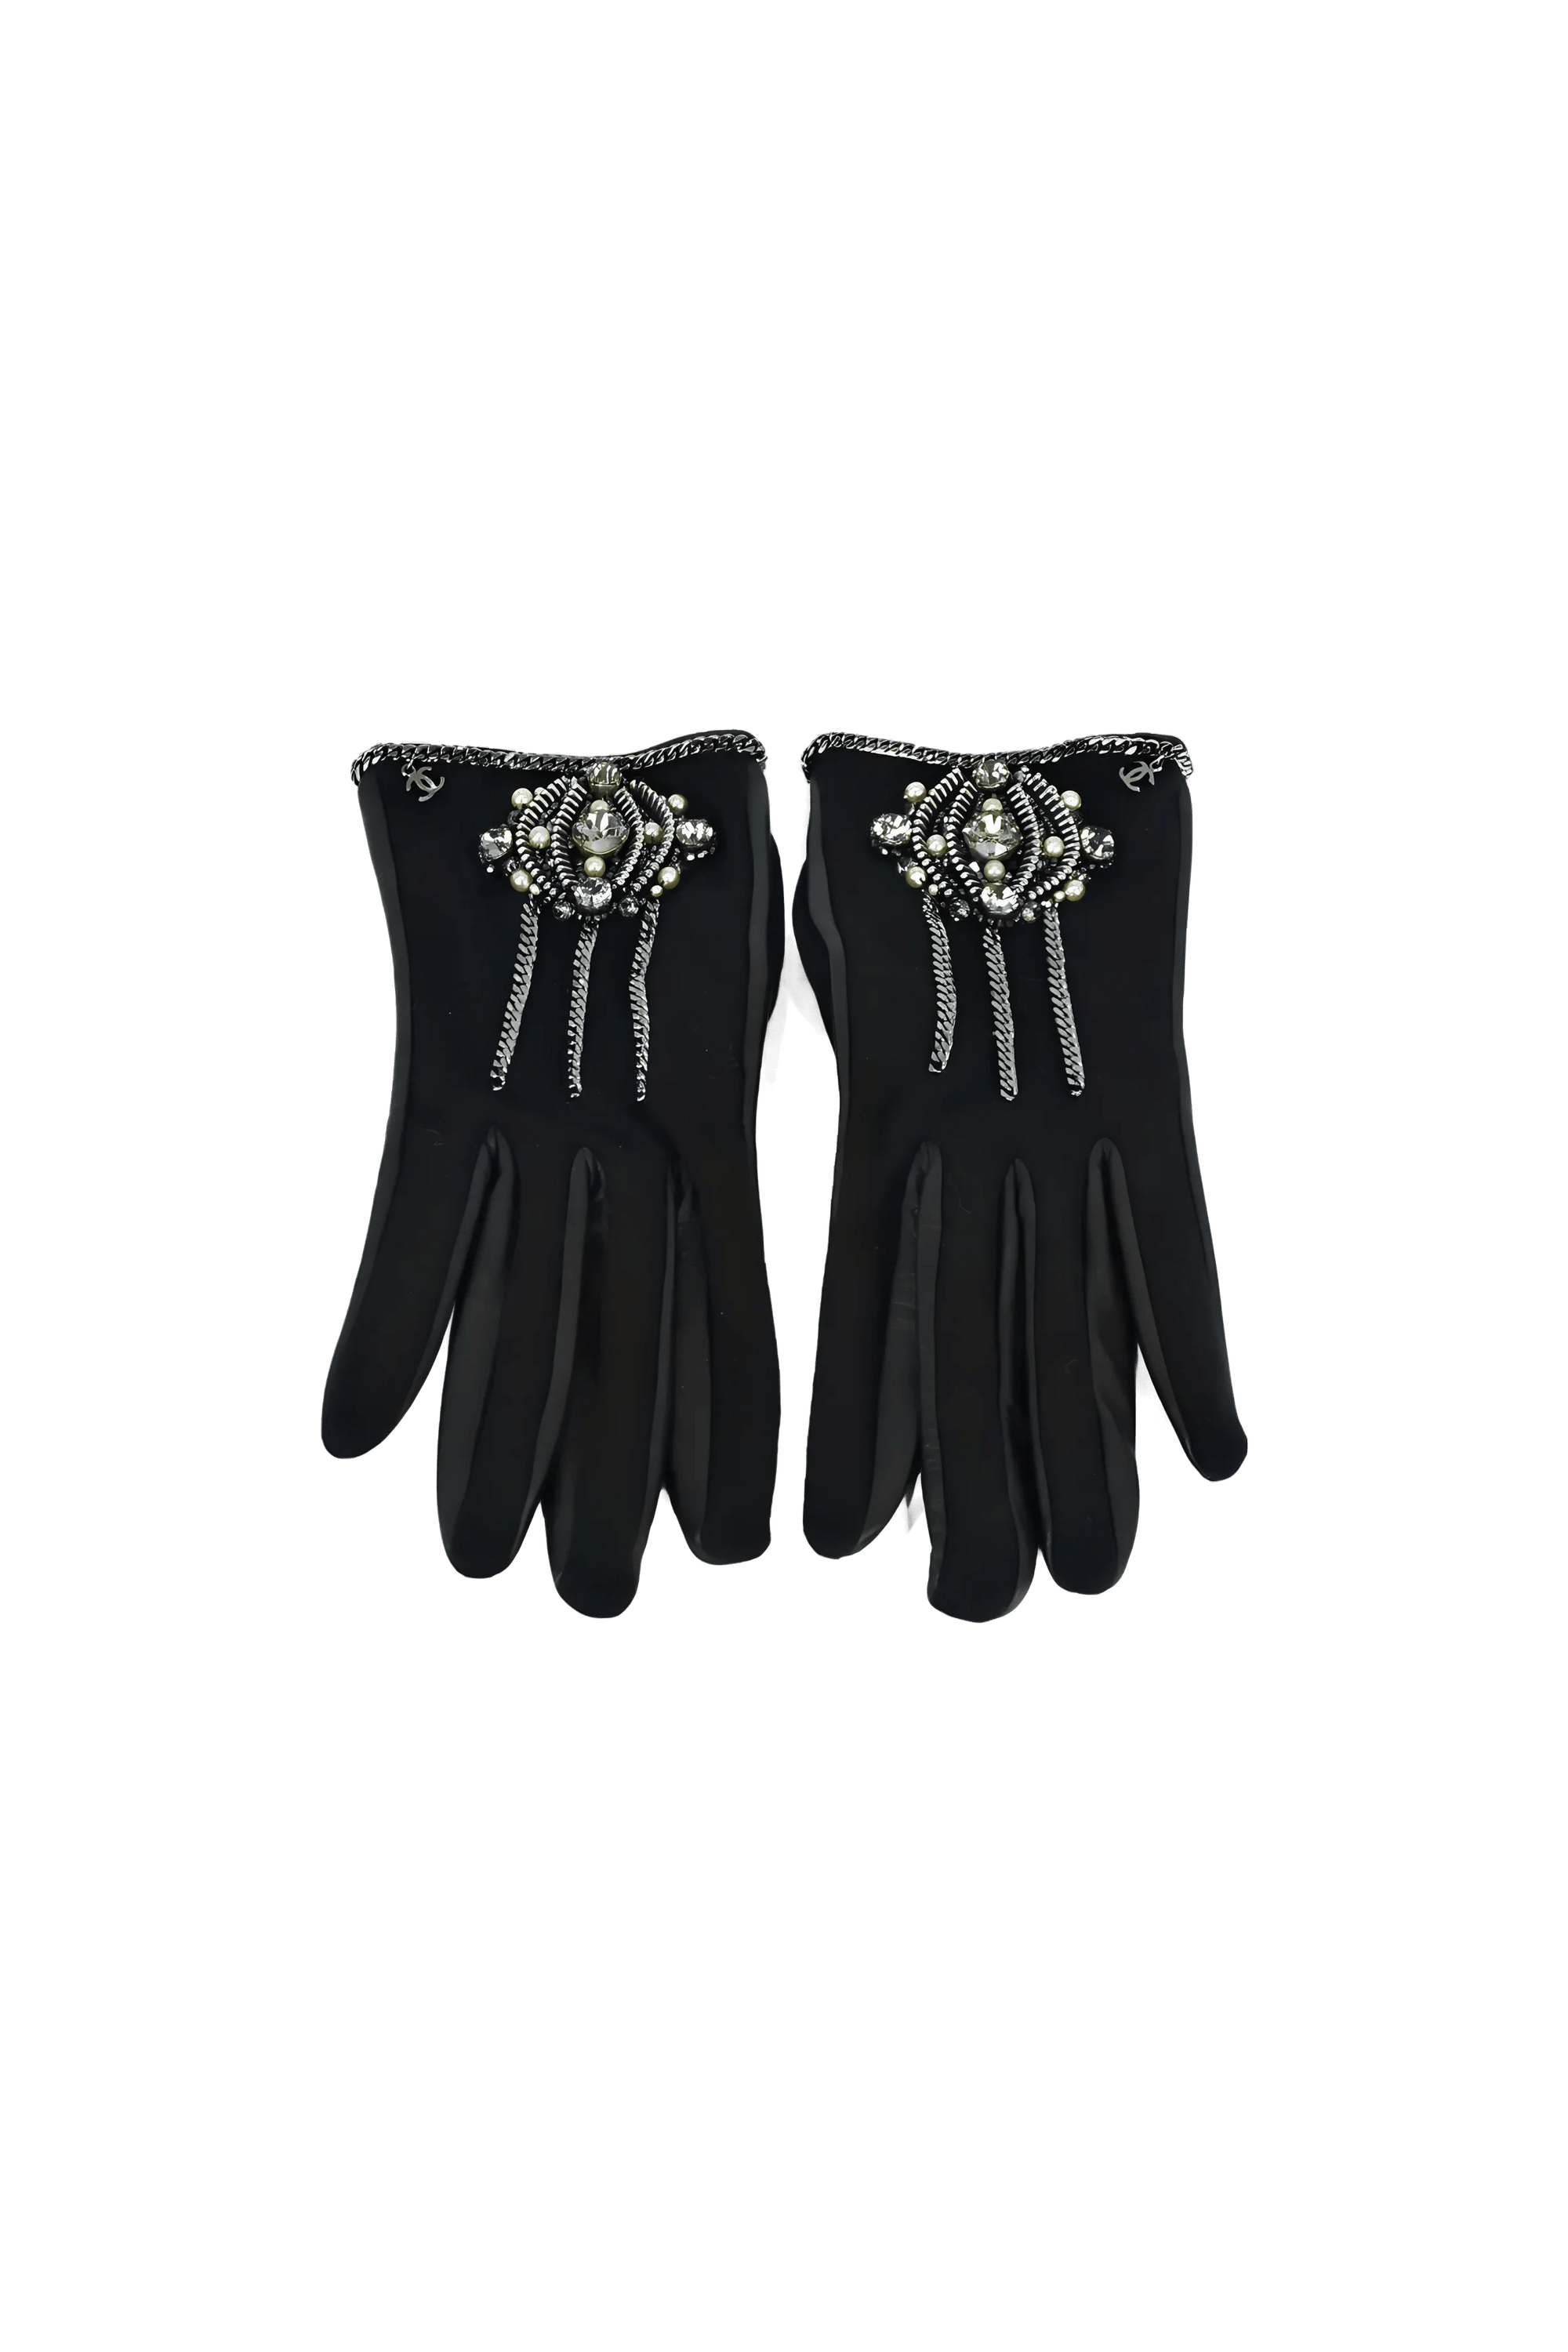 Chanel Black Leather Chain and Strass Trim Gloves sz 8